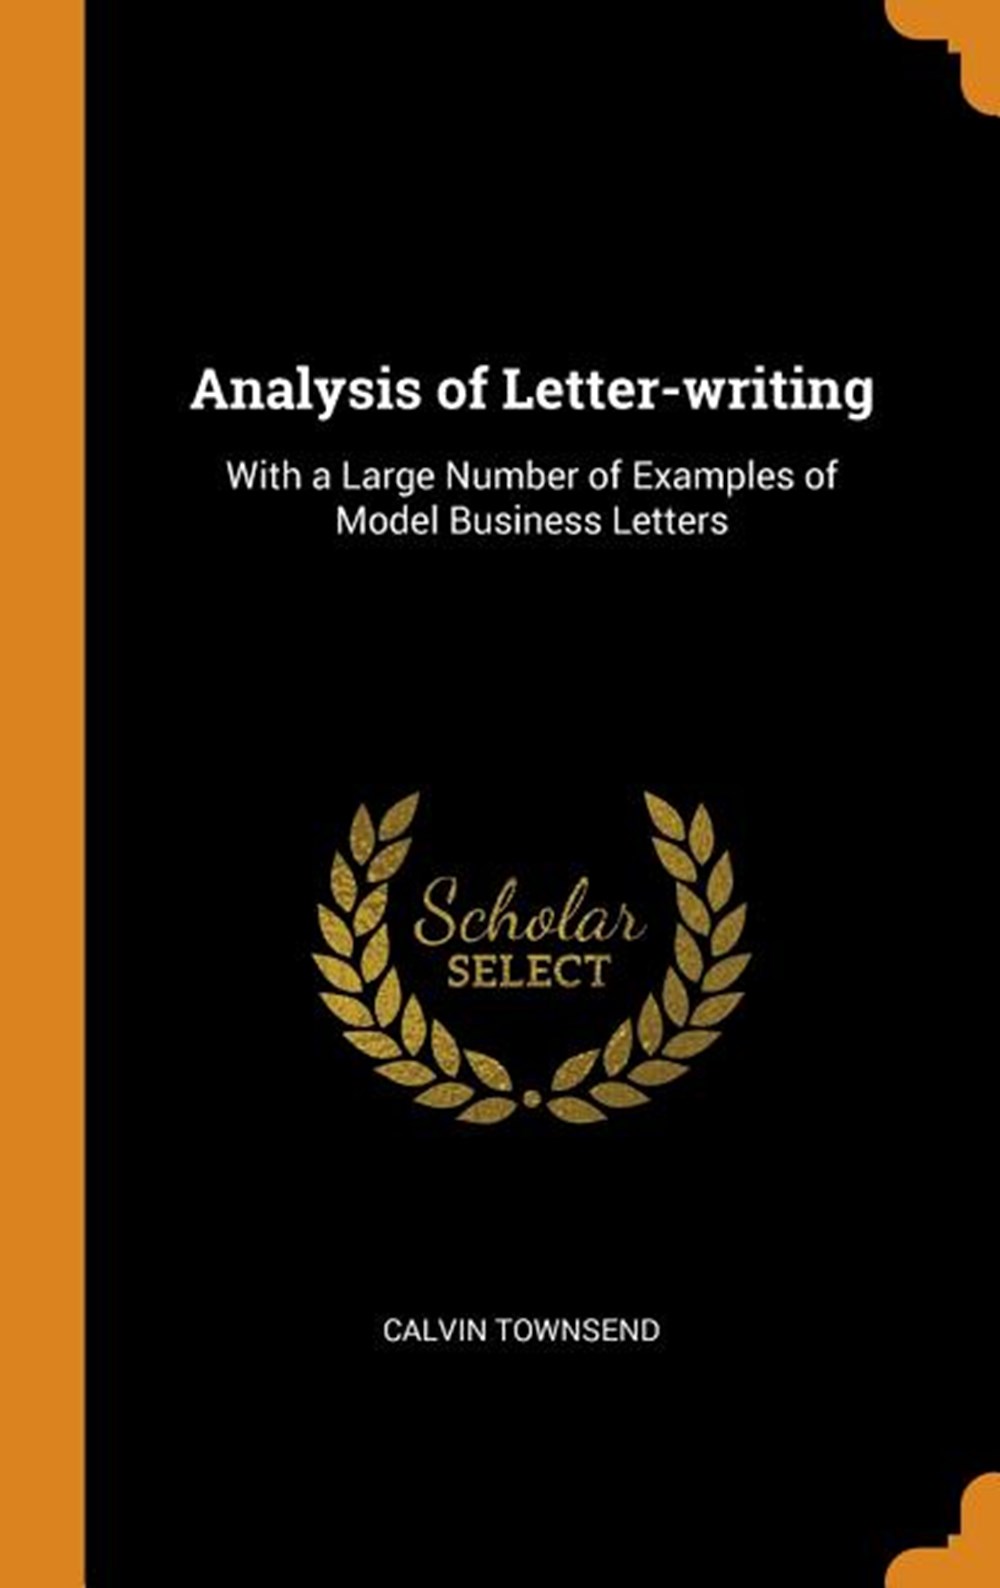 Analysis of Letter-Writing: With a Large Number of Examples of Model Business Letters